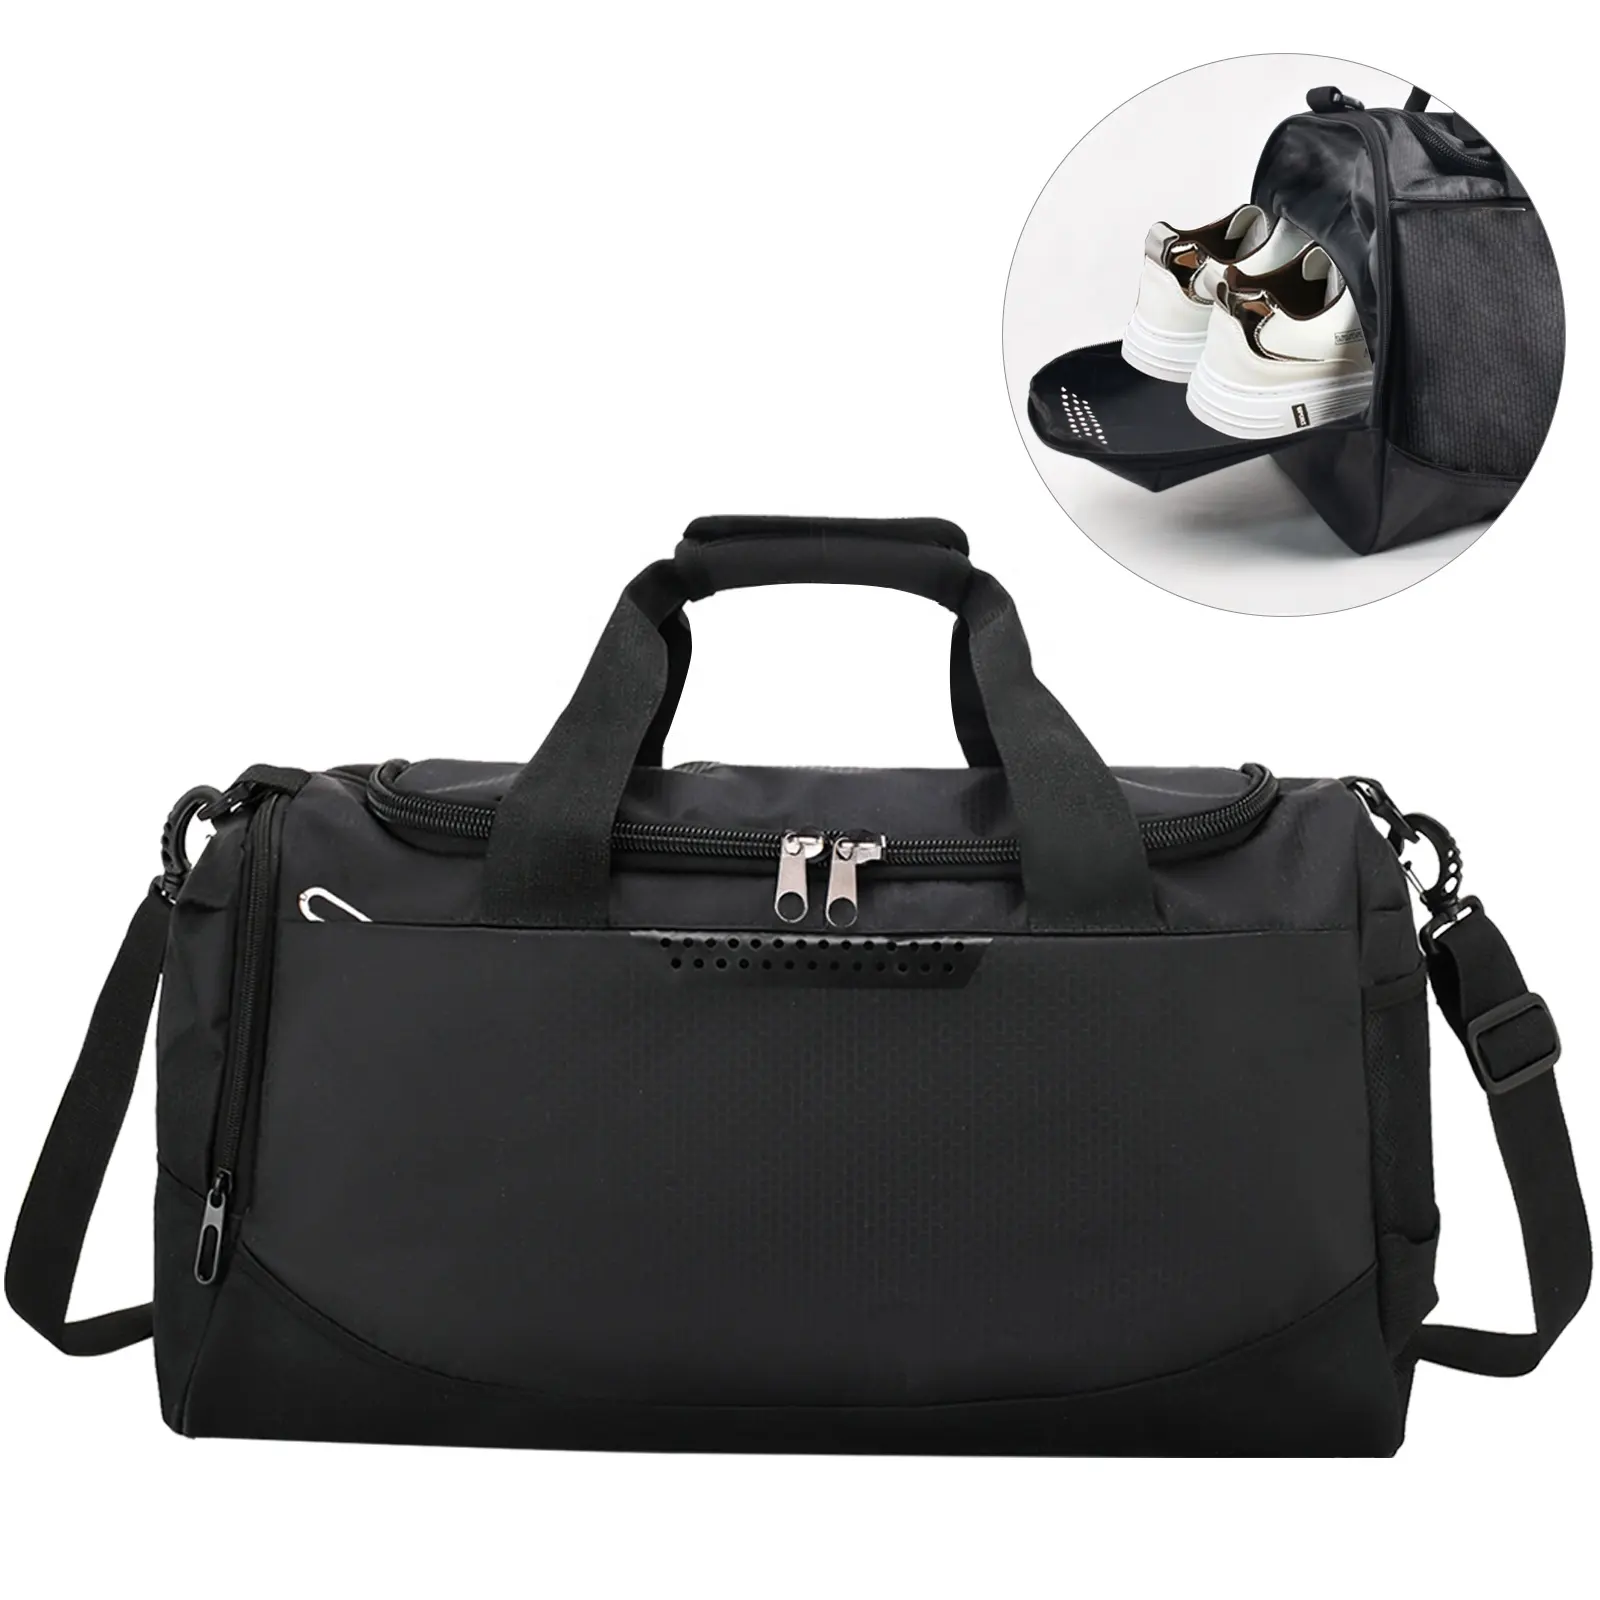 Sports Gym Bag with Shoes Compartment and Wet Pocket  Travel Duffle Bag for Men and Women